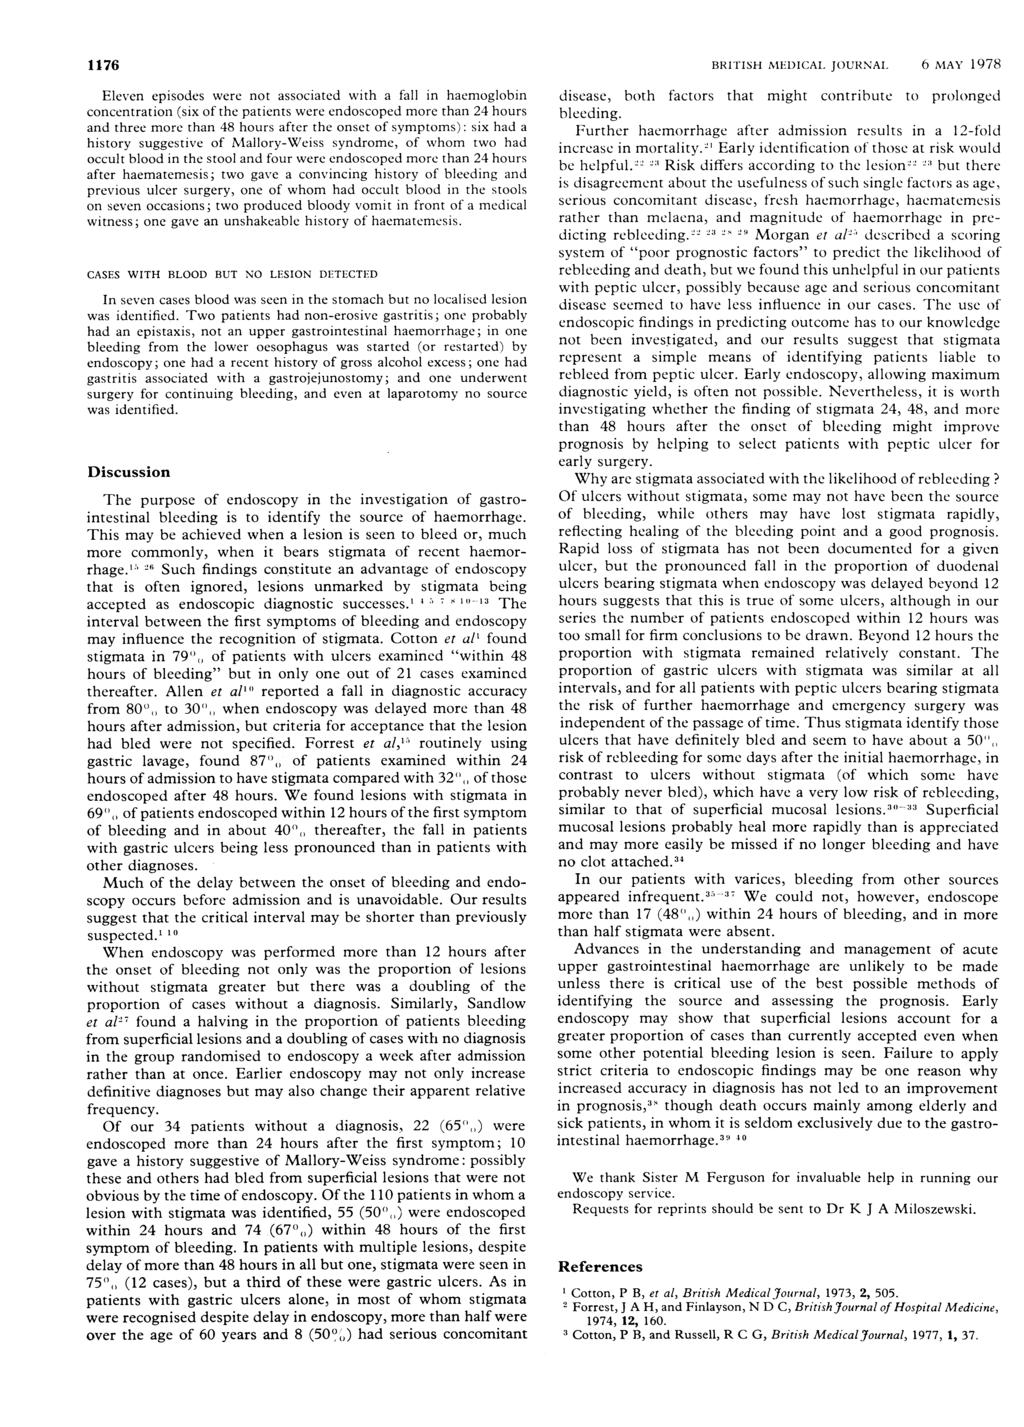 1176 BRITISH MEDICAL JOURNAL 6 MAY 1978 Eleven episodes were not associated with a fall in haemoglobin concentration (six of the patients were endoscoped more than 24 hours and three more than 48